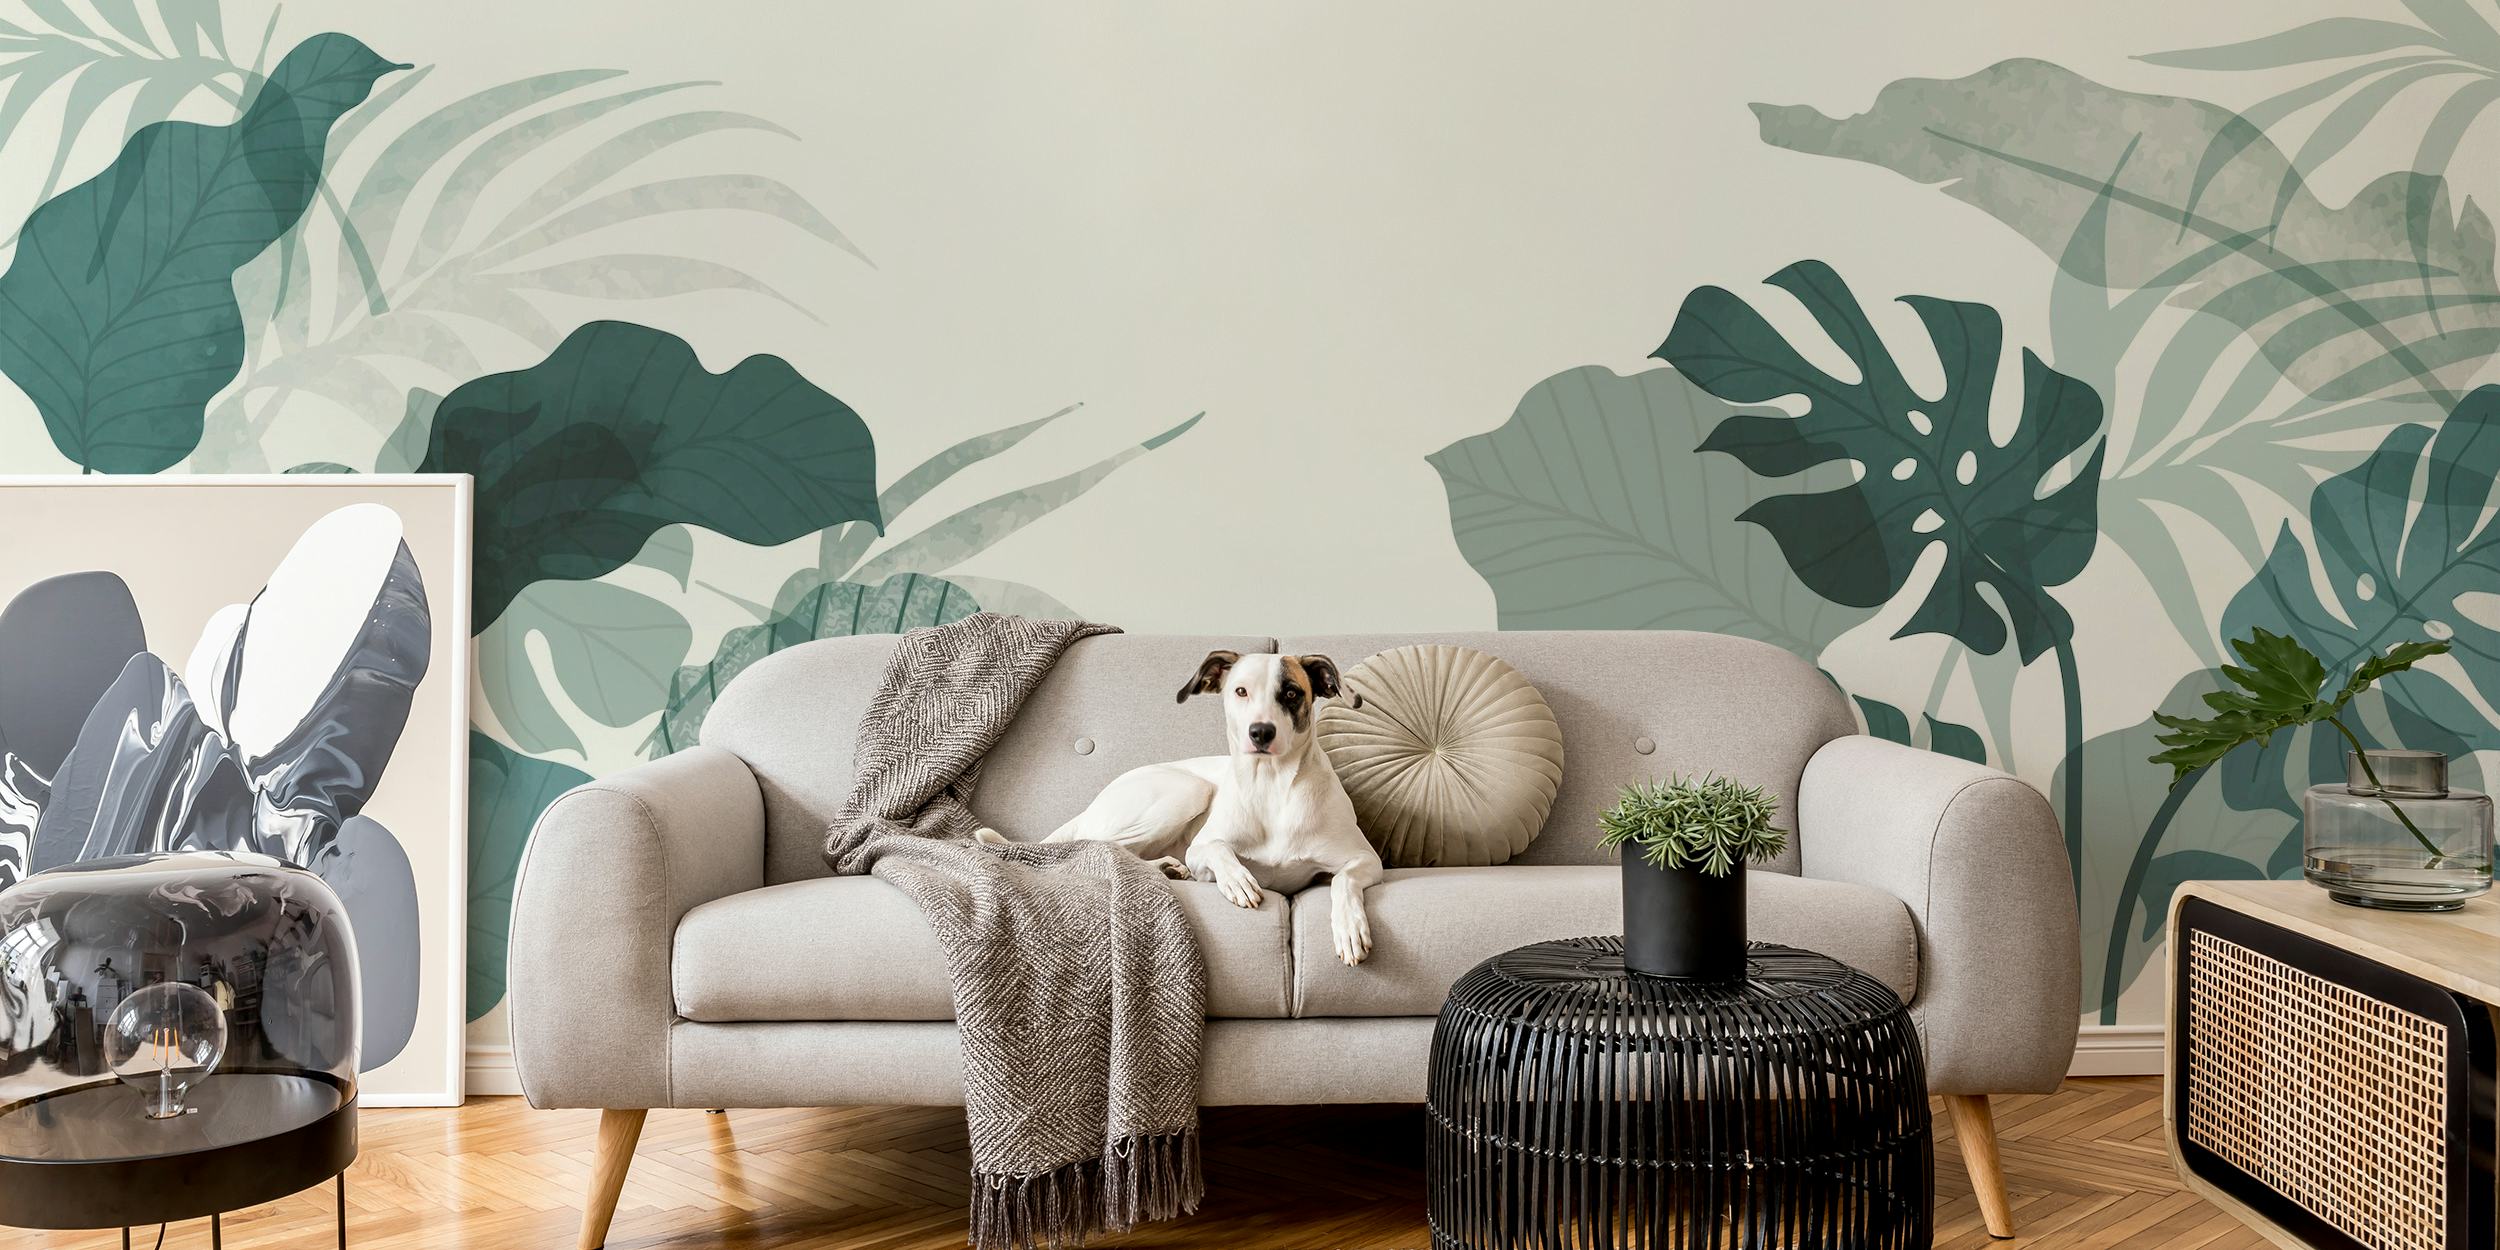 Elegant botanical wall mural with muted green tones and leaf patterns